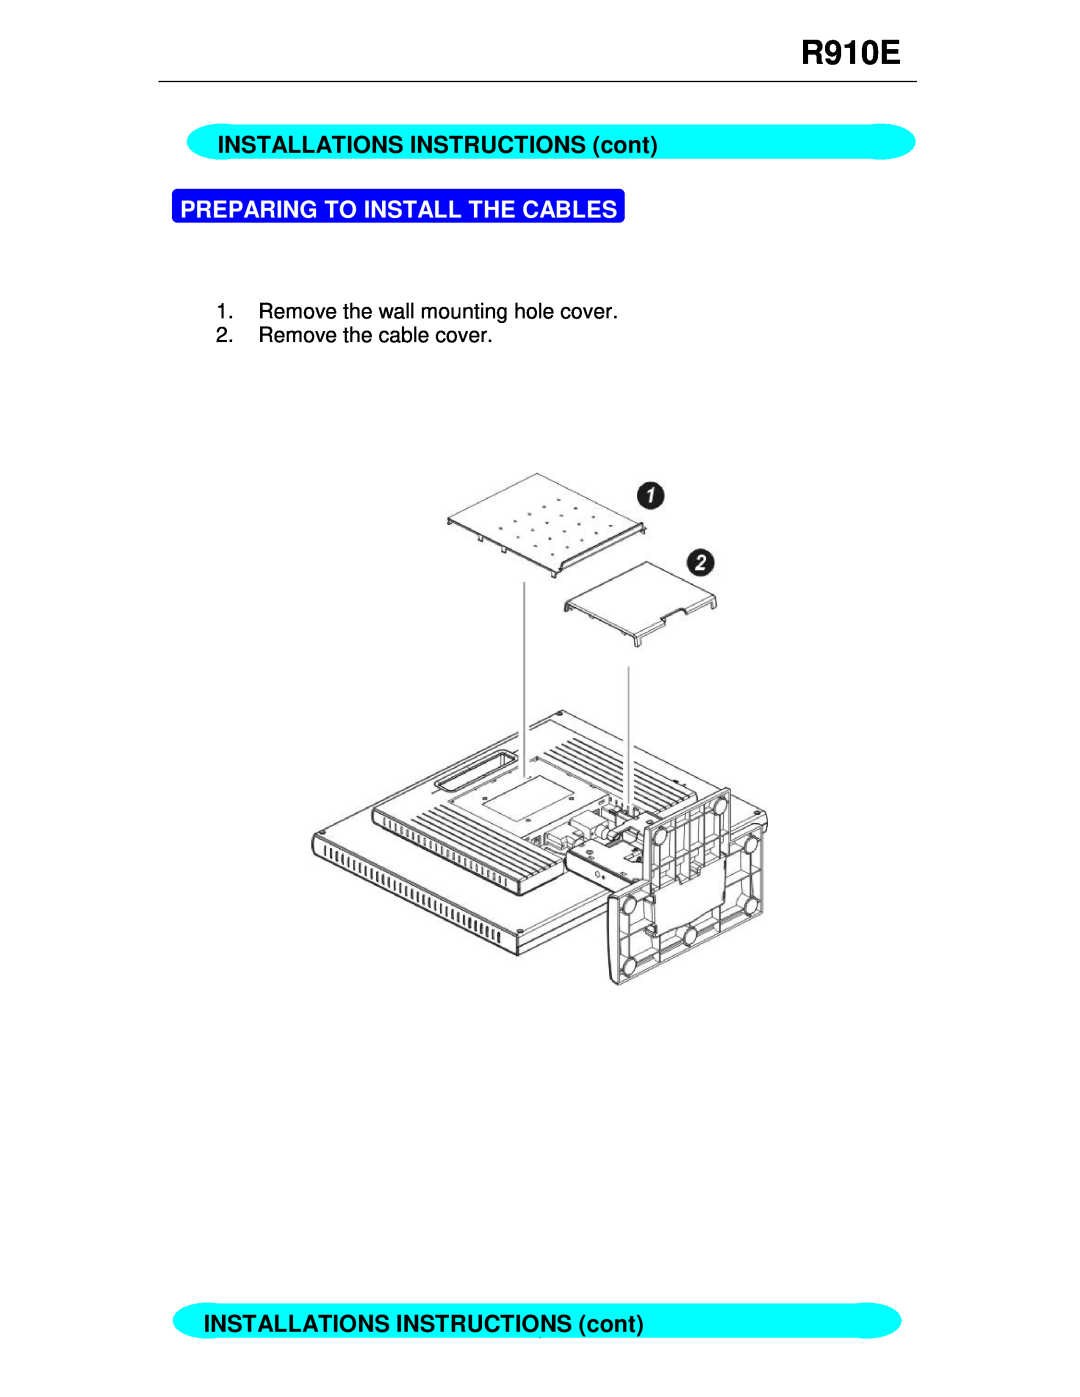 Rosewill R910E user manual INSTALLATIONS INSTRUCTIONS cont, Preparing To Install The Cables 